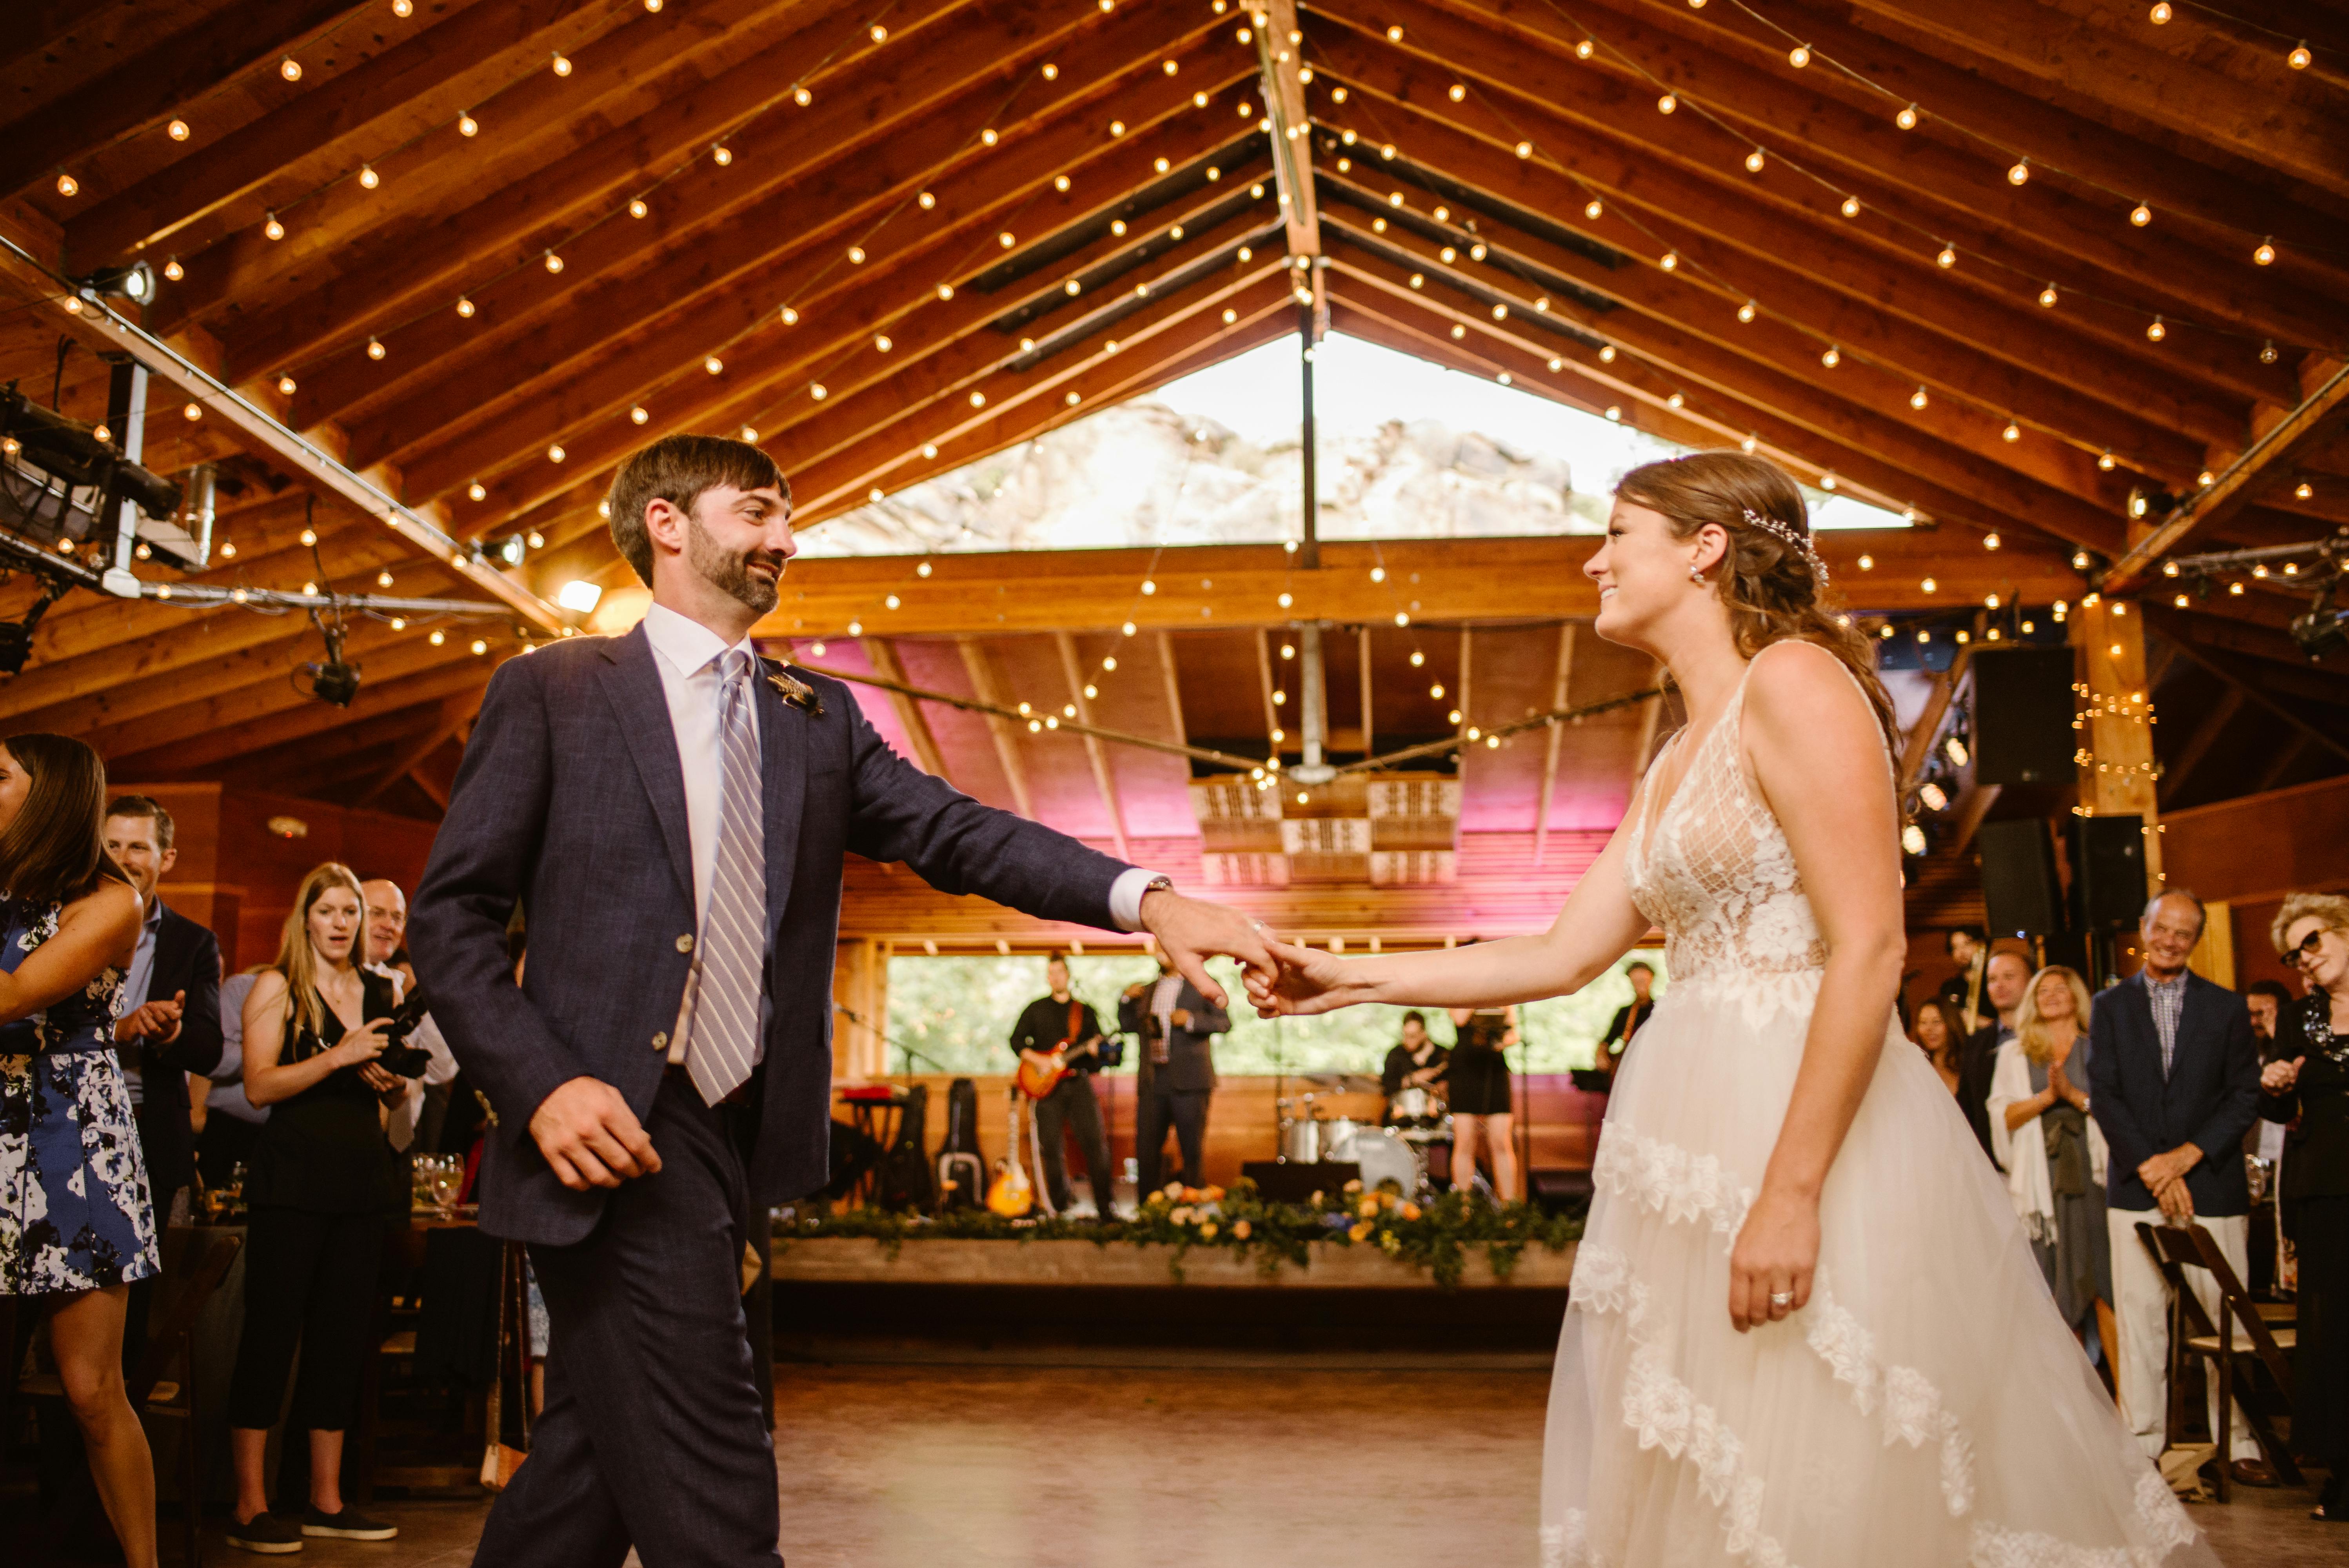 Chic wedding with fairy lights stringed across the ceiling in Lyons, CO | PartySlate